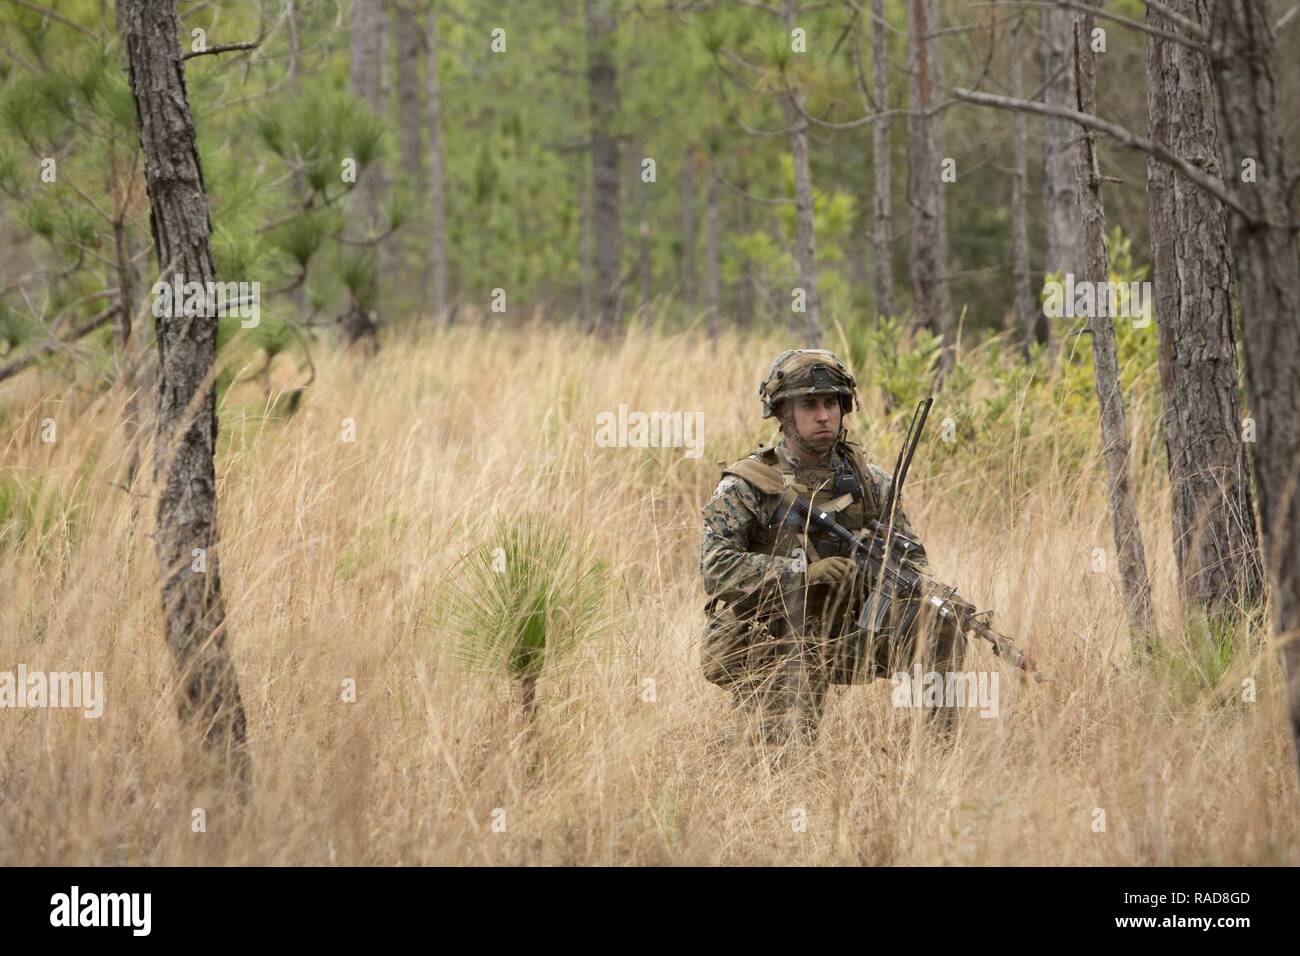 A U.S. Marine with Fox Company, 2nd Battalion, 6th Marine Regiment (2/6), 2nd Marine Division (2d MARDIV), posts security during a 2/6 field training exercise on Camp Lejeune, N.C., Jan. 26, 2017. The purpose of the exercise was to develop skills learned from previous field training while integrating mechanized vehicle assets in order to maintain combat proficiency. Stock Photo